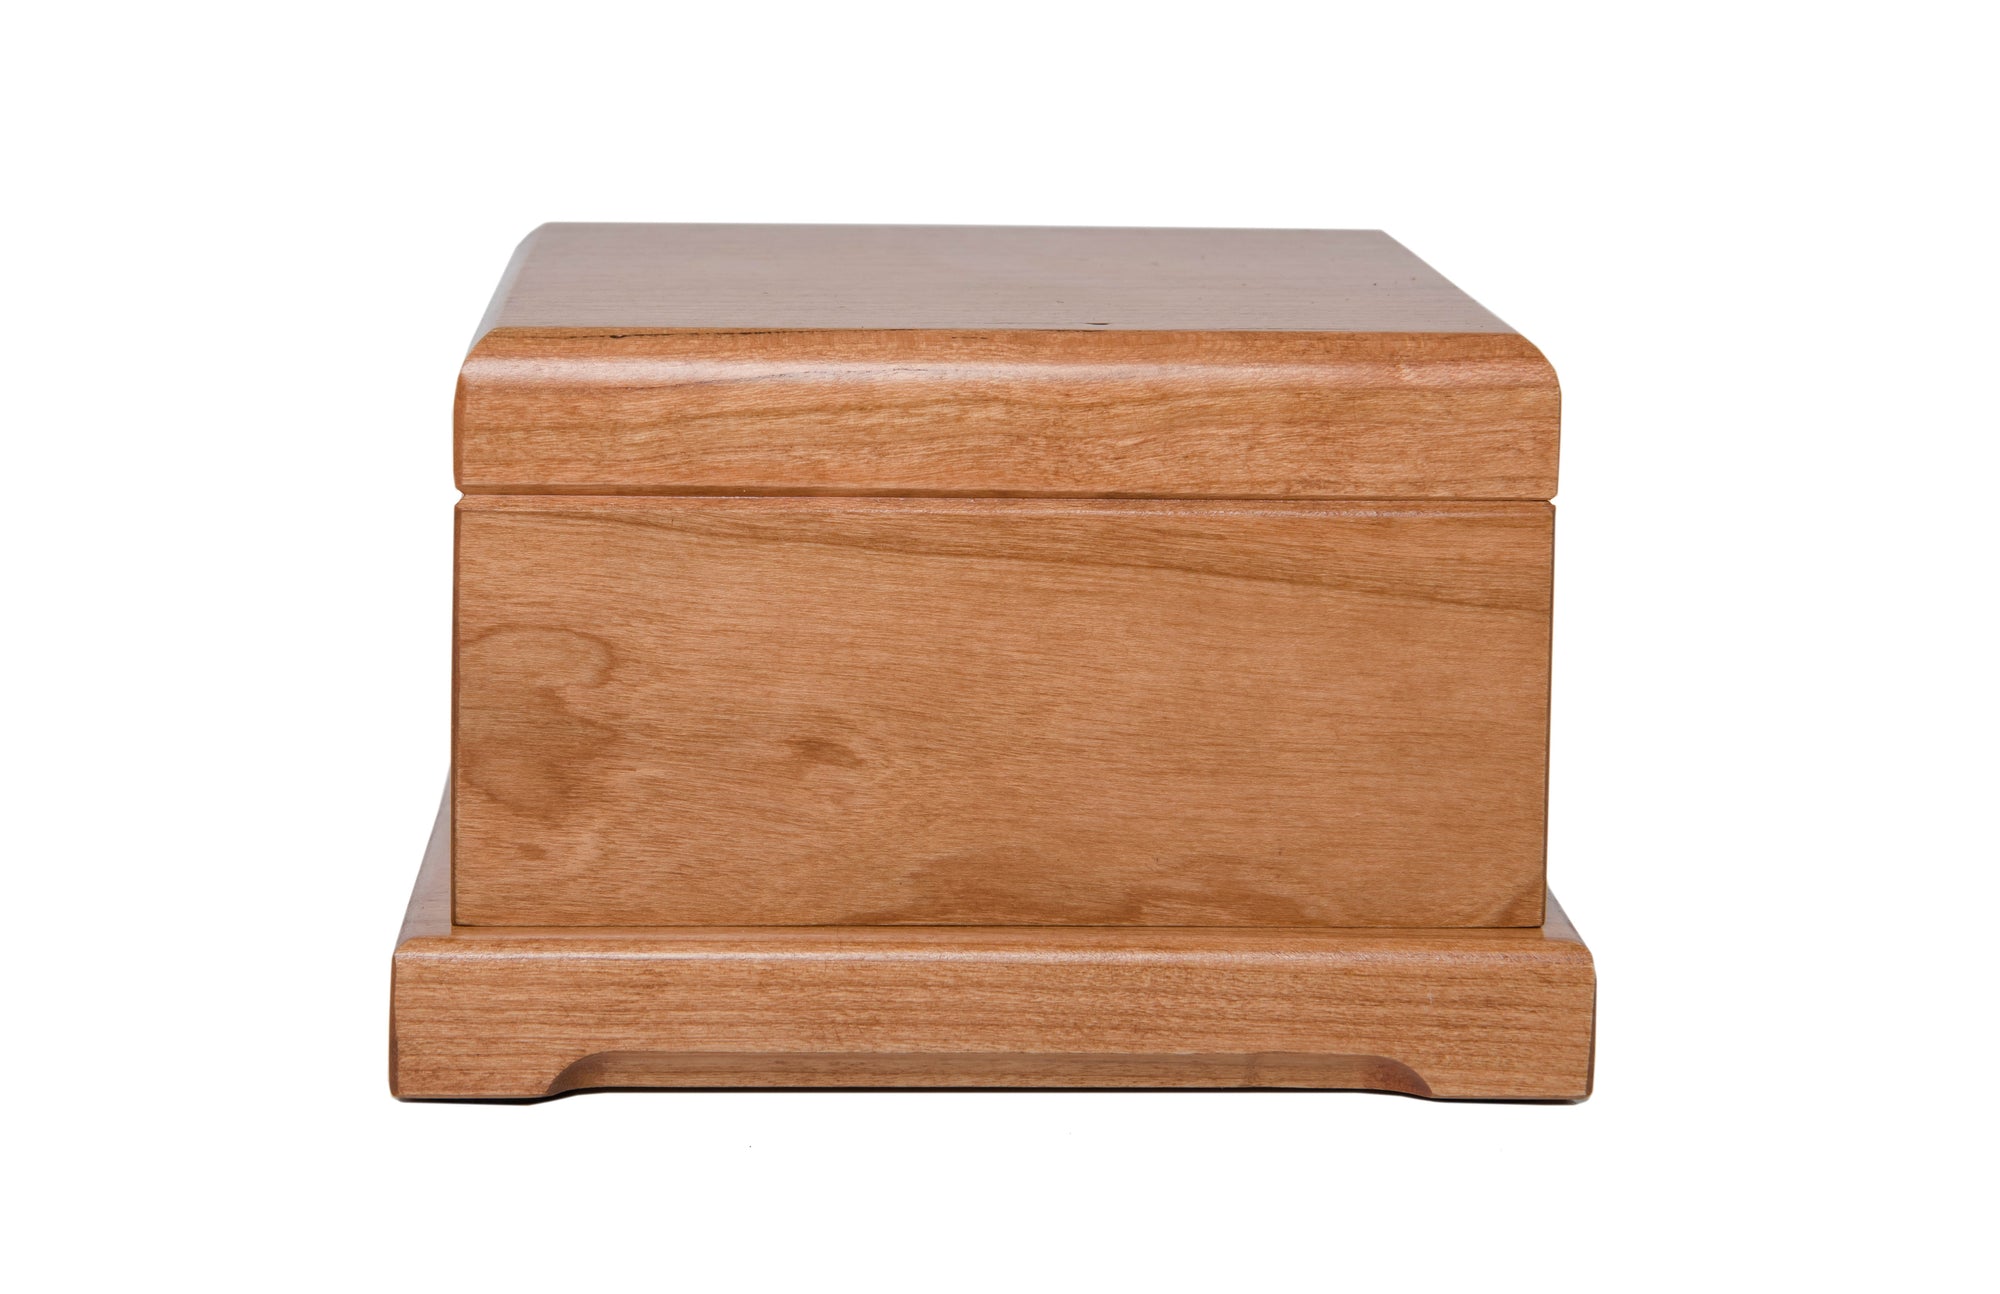 Pet Memorial Keepsake Urn Box for Dog or Cat - Once I Held You In My Arms